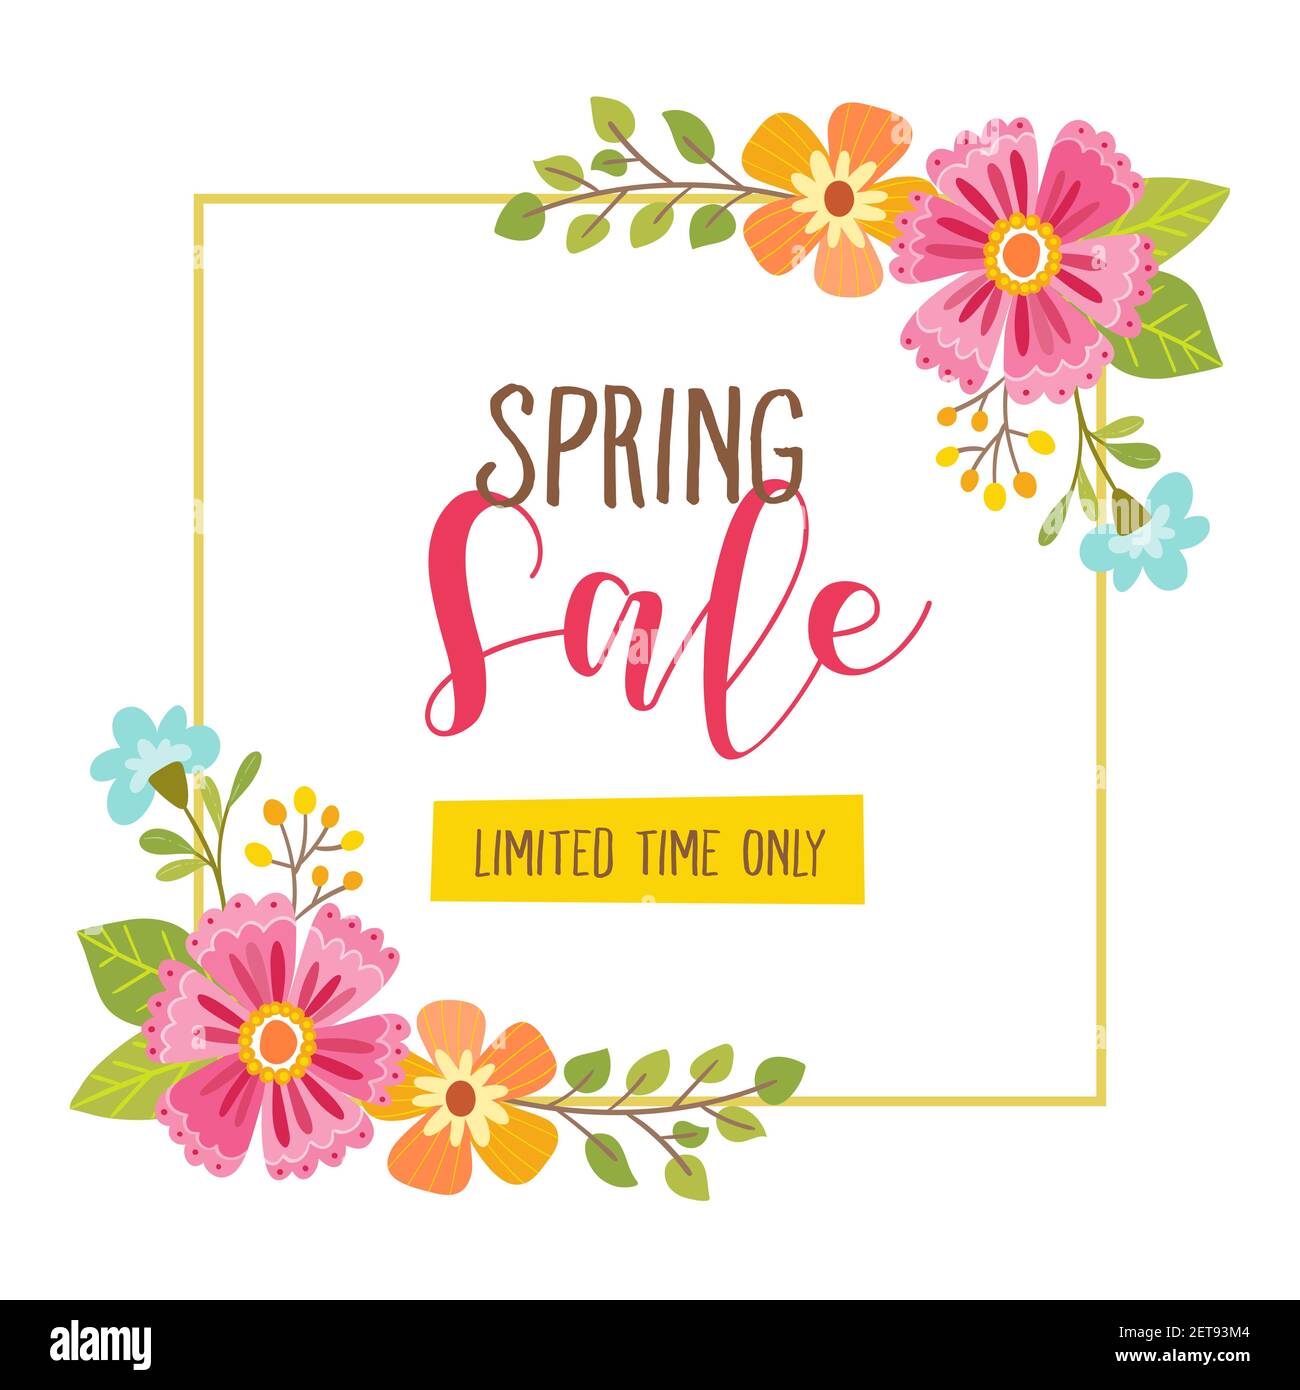 Floral spring sale card with limited time offer text included. Cute floral frame, perfect for backgrounds, cards, posters and other sale resources. Ve Stock Vector